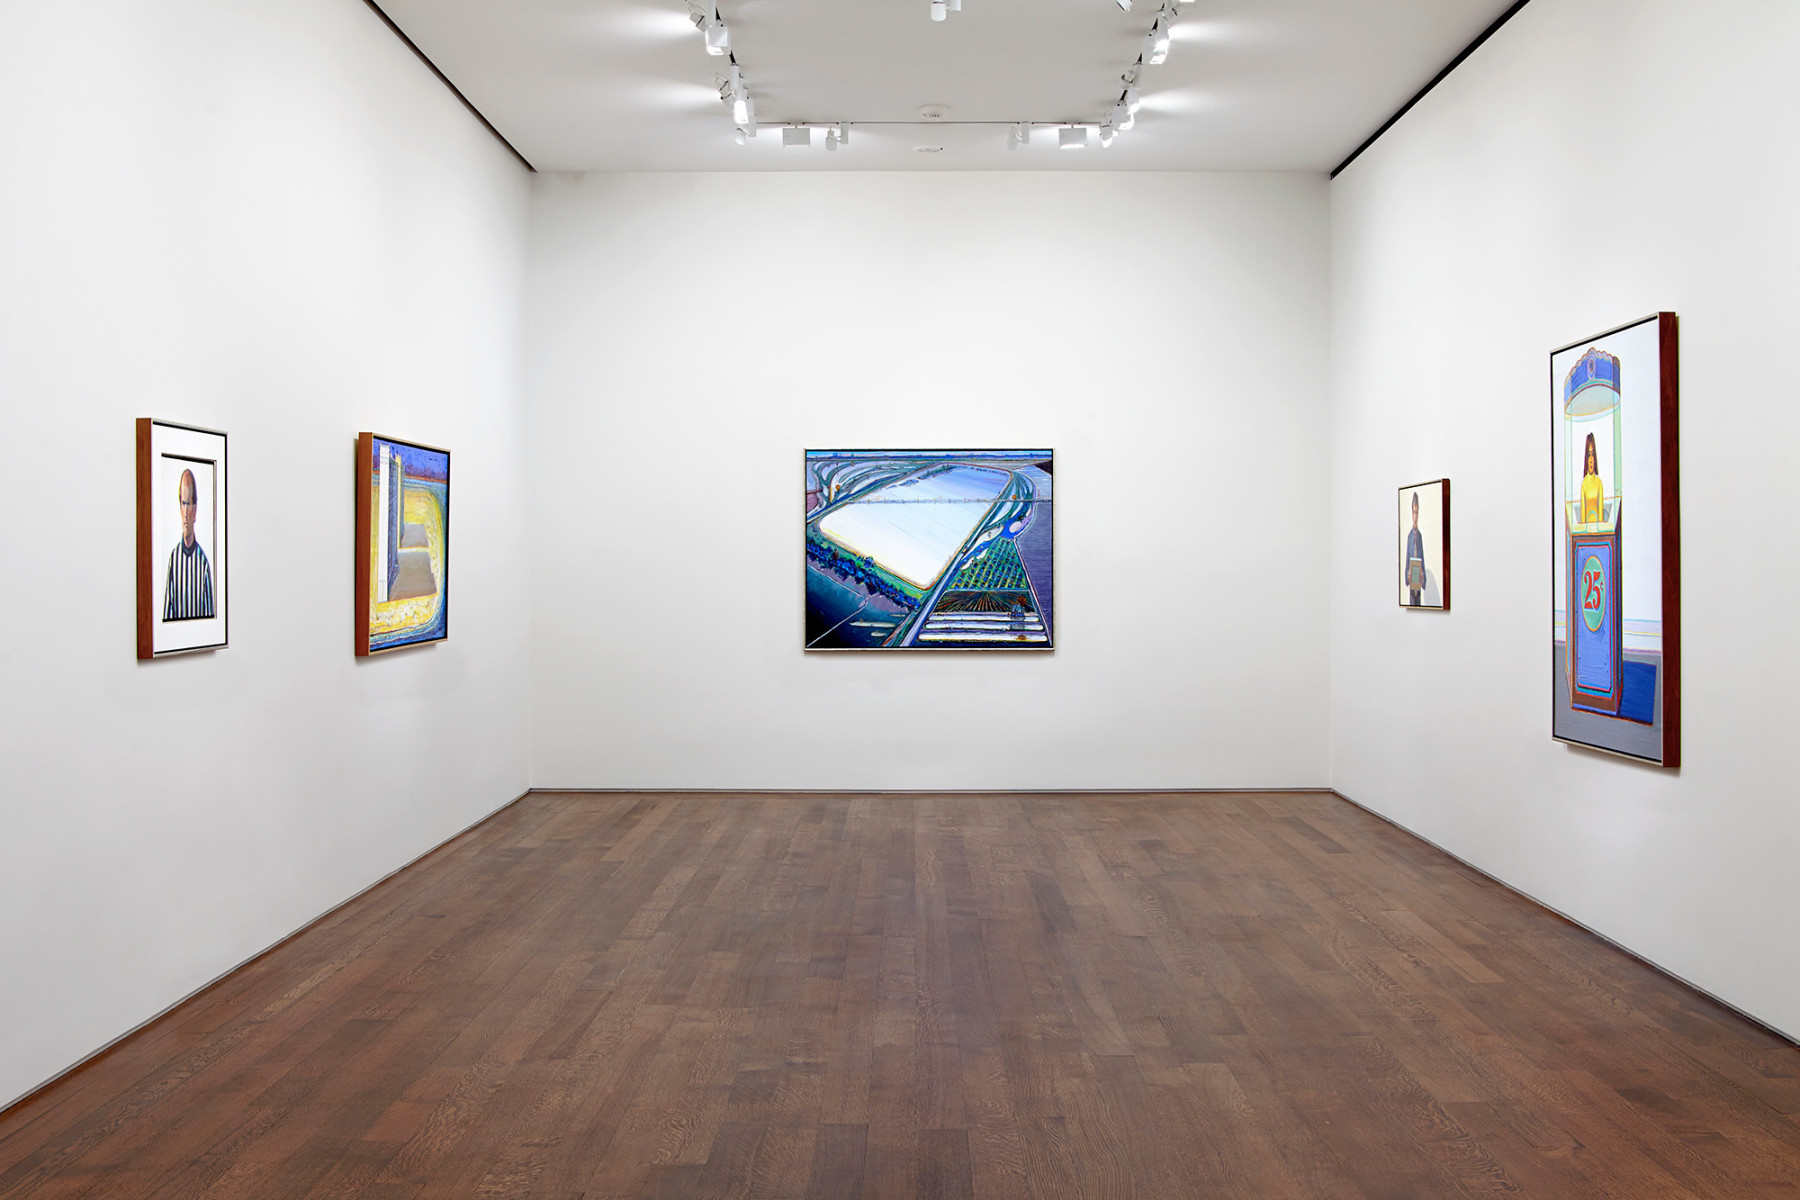 Installation view of Wayne Thiebaud at Acquavella Galleries from September 30 - November 20, 2014.